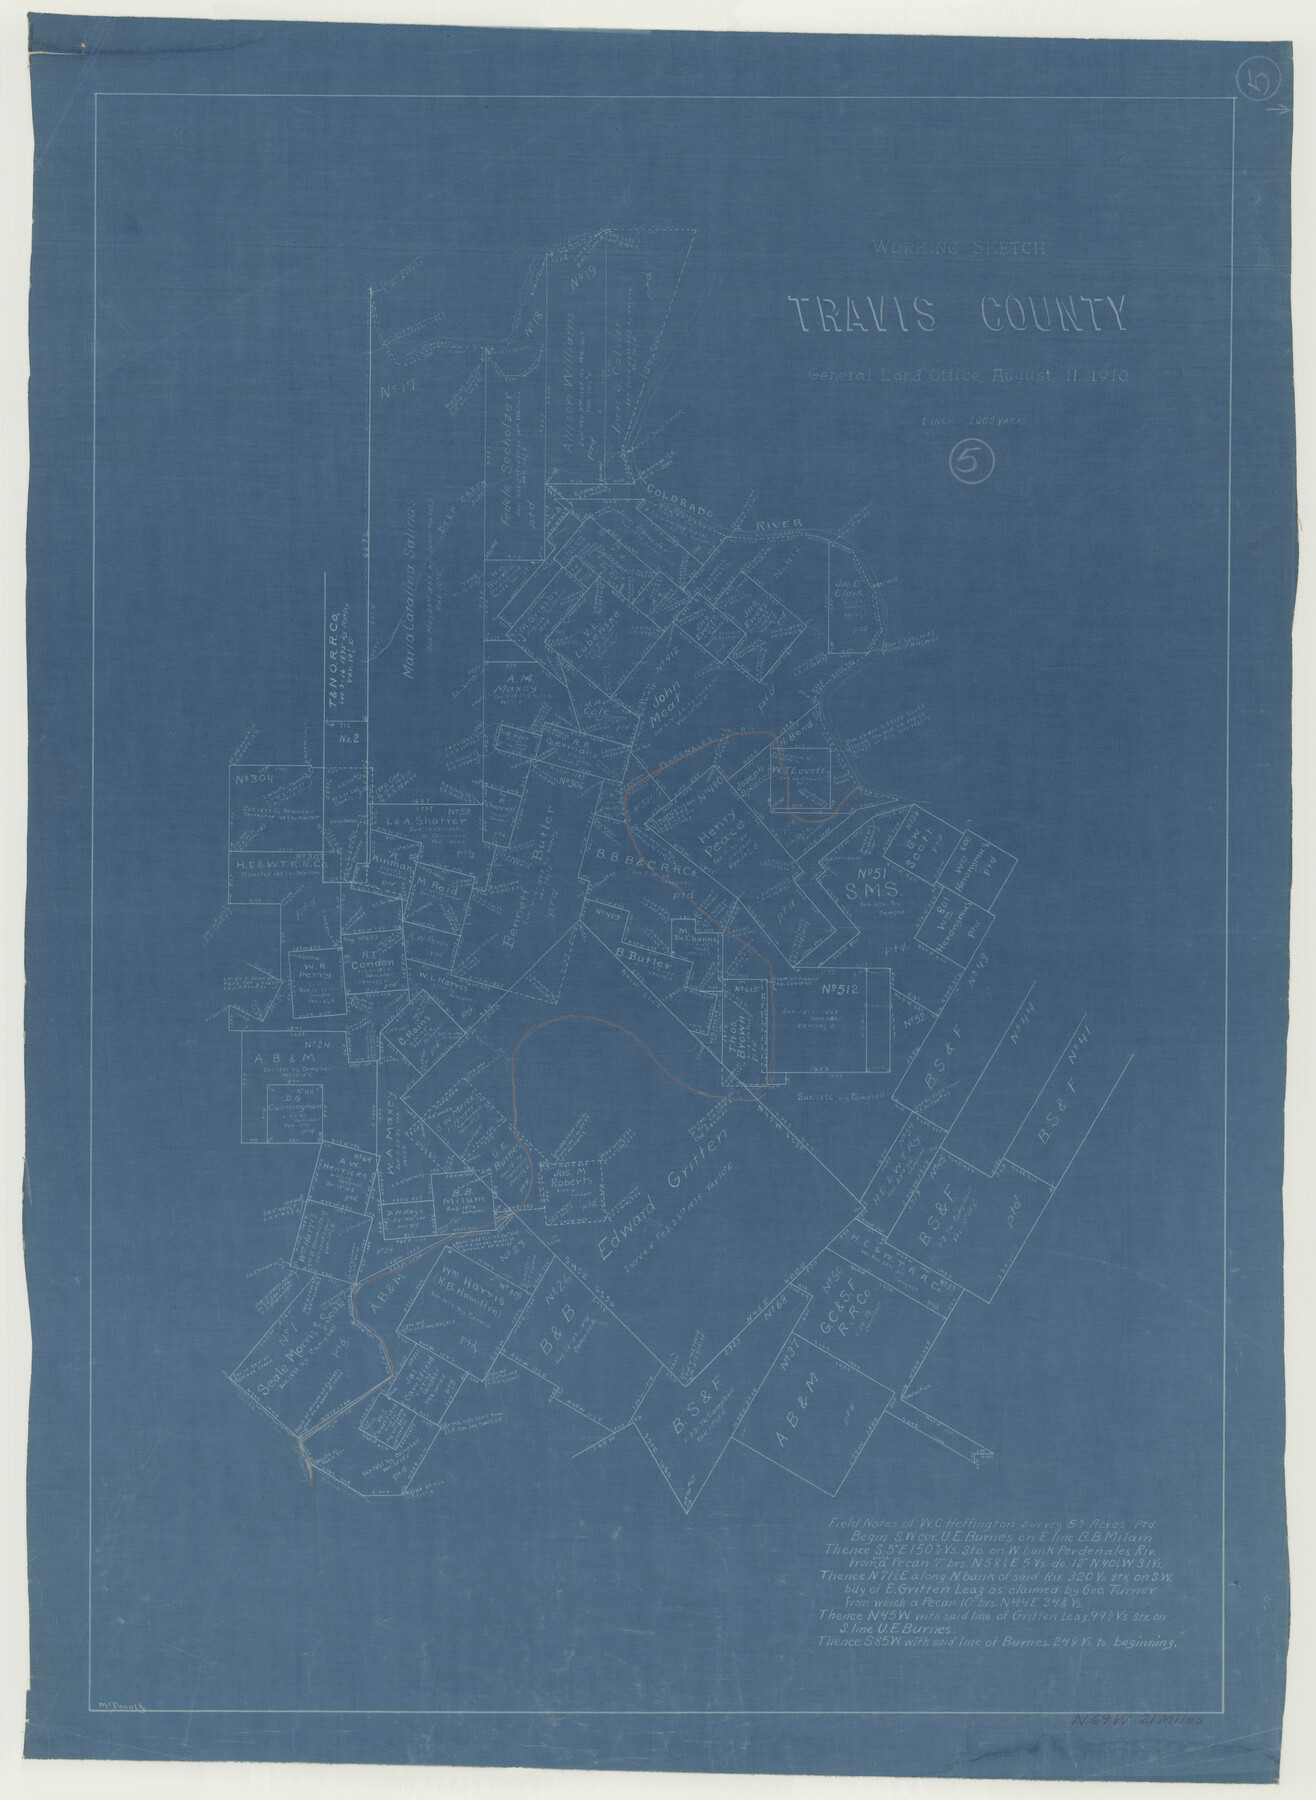 69389, Travis County Working Sketch 5, General Map Collection